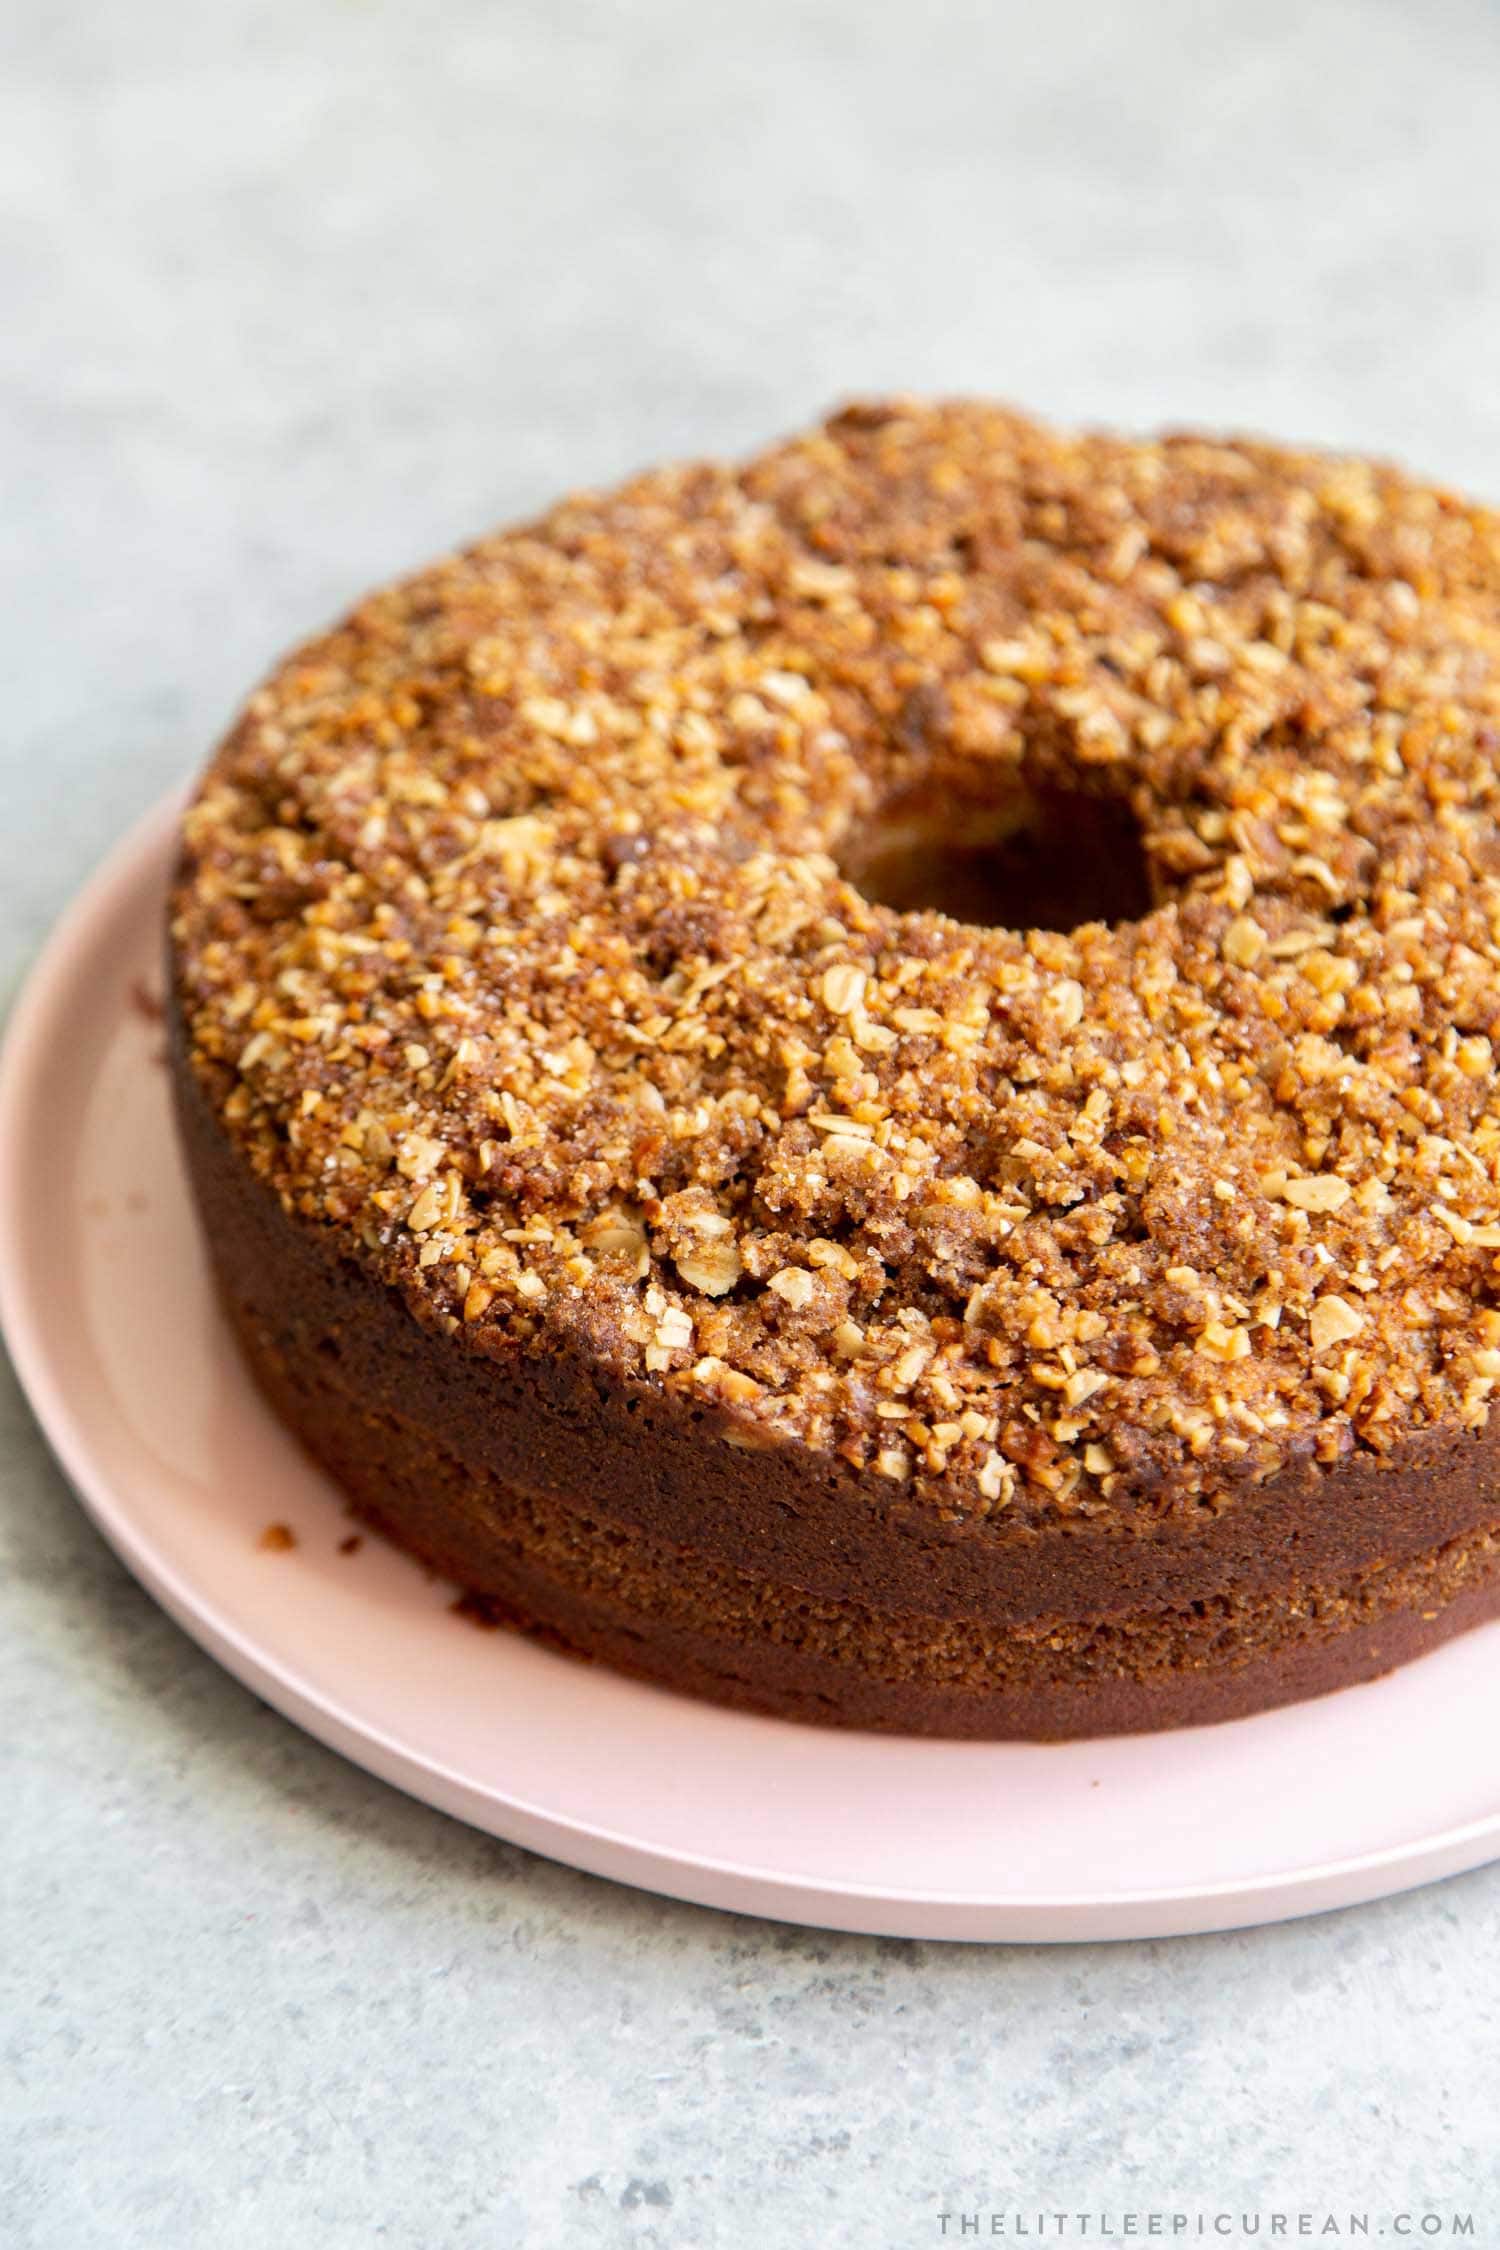 Banana Crumb Cake. Moist banana cake with cinnamon sugar filling topped with walnut oat crumble topping.